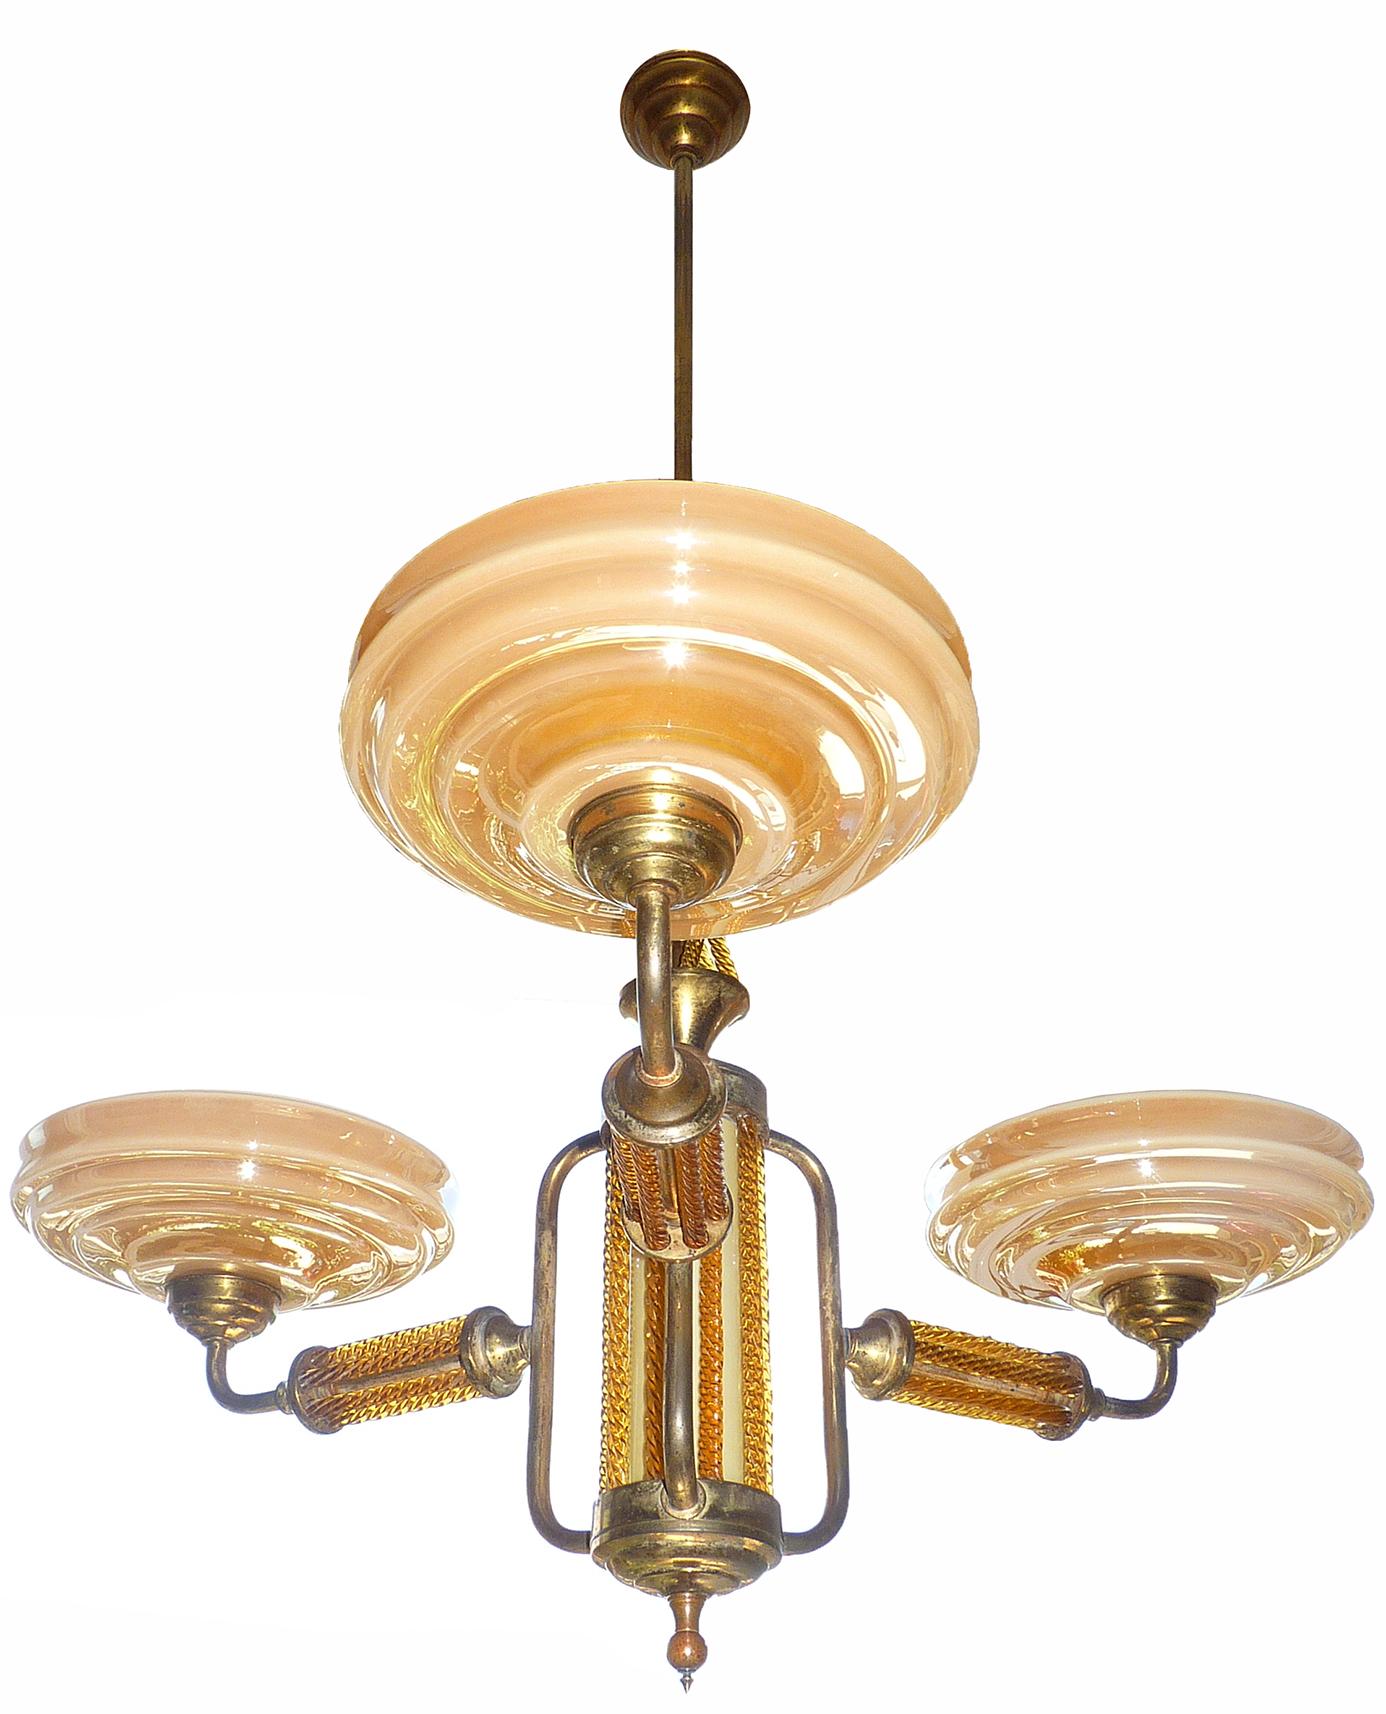 Gorgeous unusual large antique Italian Murano Art Nouveau Art Deco iridescent opaline glass and amber crystal ornate tubes, brass chandelier.
It holds four-light bulbs, one in the center,
Measures:
Diameter 31.5 in / 80 cm
Height 43.3 in ; 110